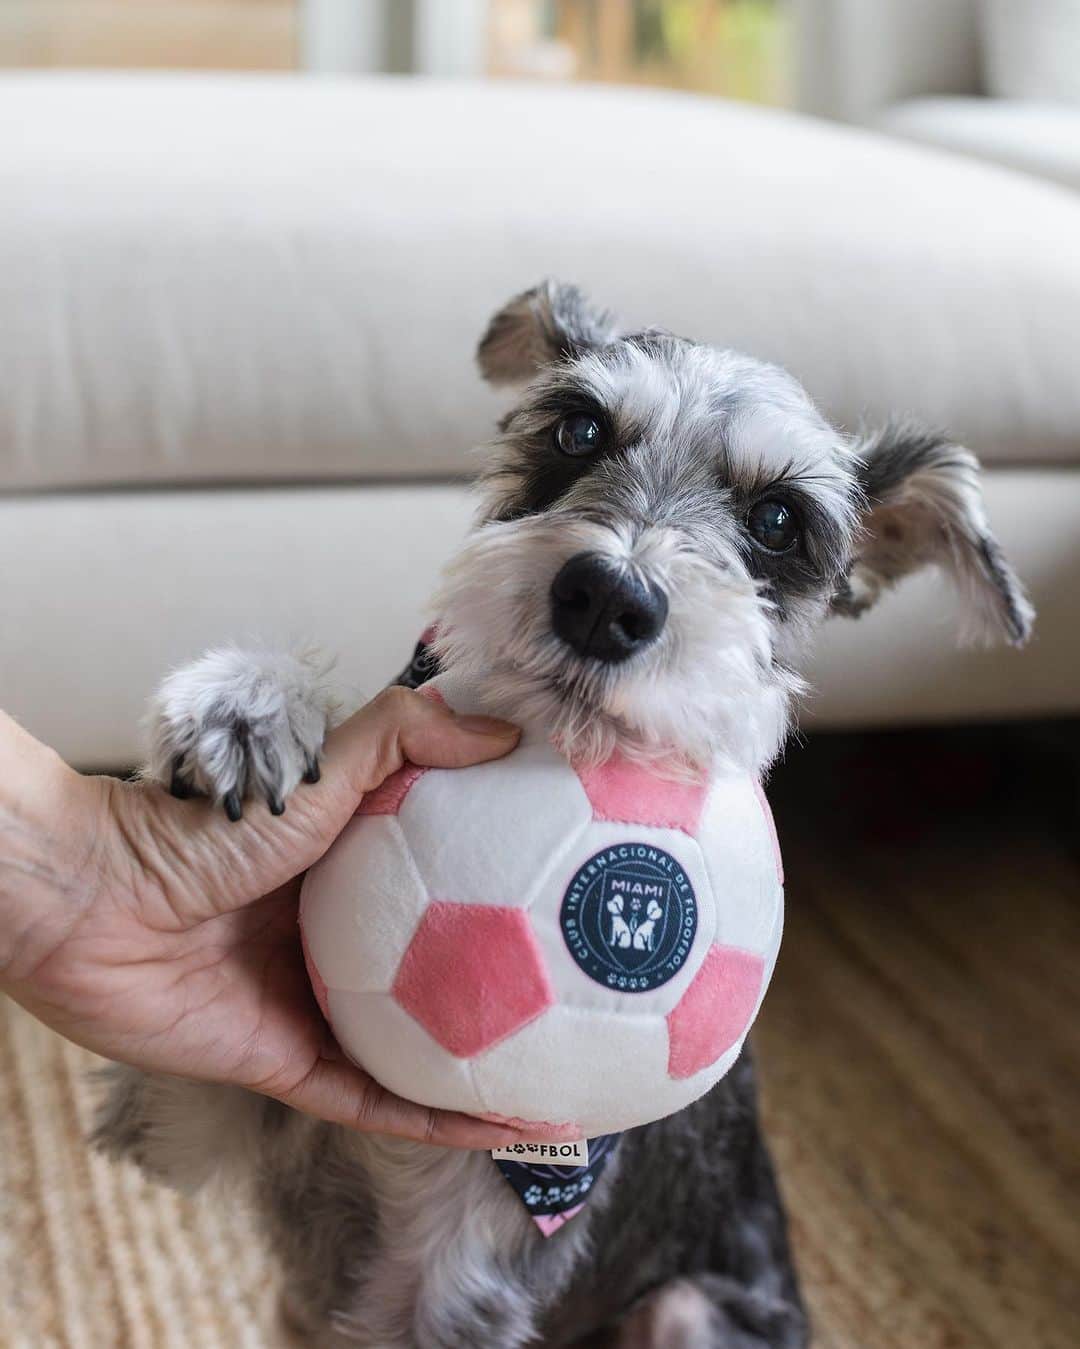 Remix the Dogのインスタグラム：「Put me in coach!! ⚽️   ‼️contest alert‼️ Do you want to become part of the Floofbol Miami soccer team? Well now is your chance!   We are looking for a TEAM CAPTAIN to represent this paw-some new team! Follow the steps below for a chance to become crowned Team Captain of Floofbol Miami (oh, and win a $100 Floofbol gift card)! 🤩🩷🐶⚽️🐾  Rules: 1. Order AT LEAST a ball and/or bandana from the Floofbol Miami collection (use code REMIX10 for 10% off)! 🩷 2. Follow @floofbol_dogtoys 3. Tag a furry friend in the comments who you want as a teammate 🐾⚽️ 4. Post a sweet audition tape (IG reel) with your new gear (don’t forget to tag @floofbol_dogtoys and use hashtag #FloofbolMiamiAuditions2023) 📽️  Contestants will be judged on creativity and quality of audition tape!  Contest ends December 4th. Good luck!   🐾⚽️🐶🐾⚽️🐶🐾⚽️🐶  Best of luck!  #intermiamicf #messi #futebol #soccer」